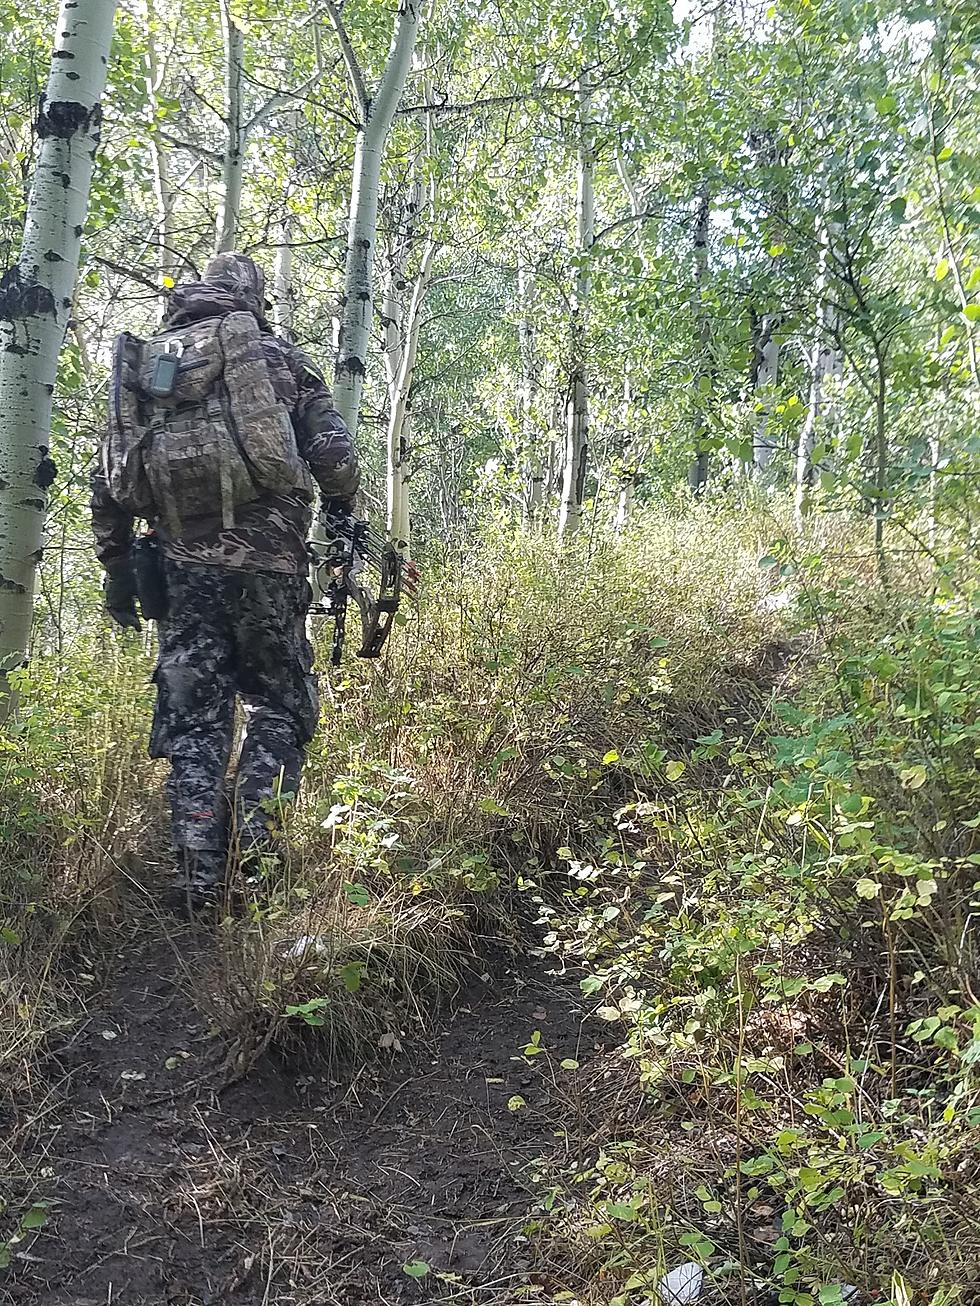 Montana Hunting Stereotypes – Which One Are You Guilty Of?